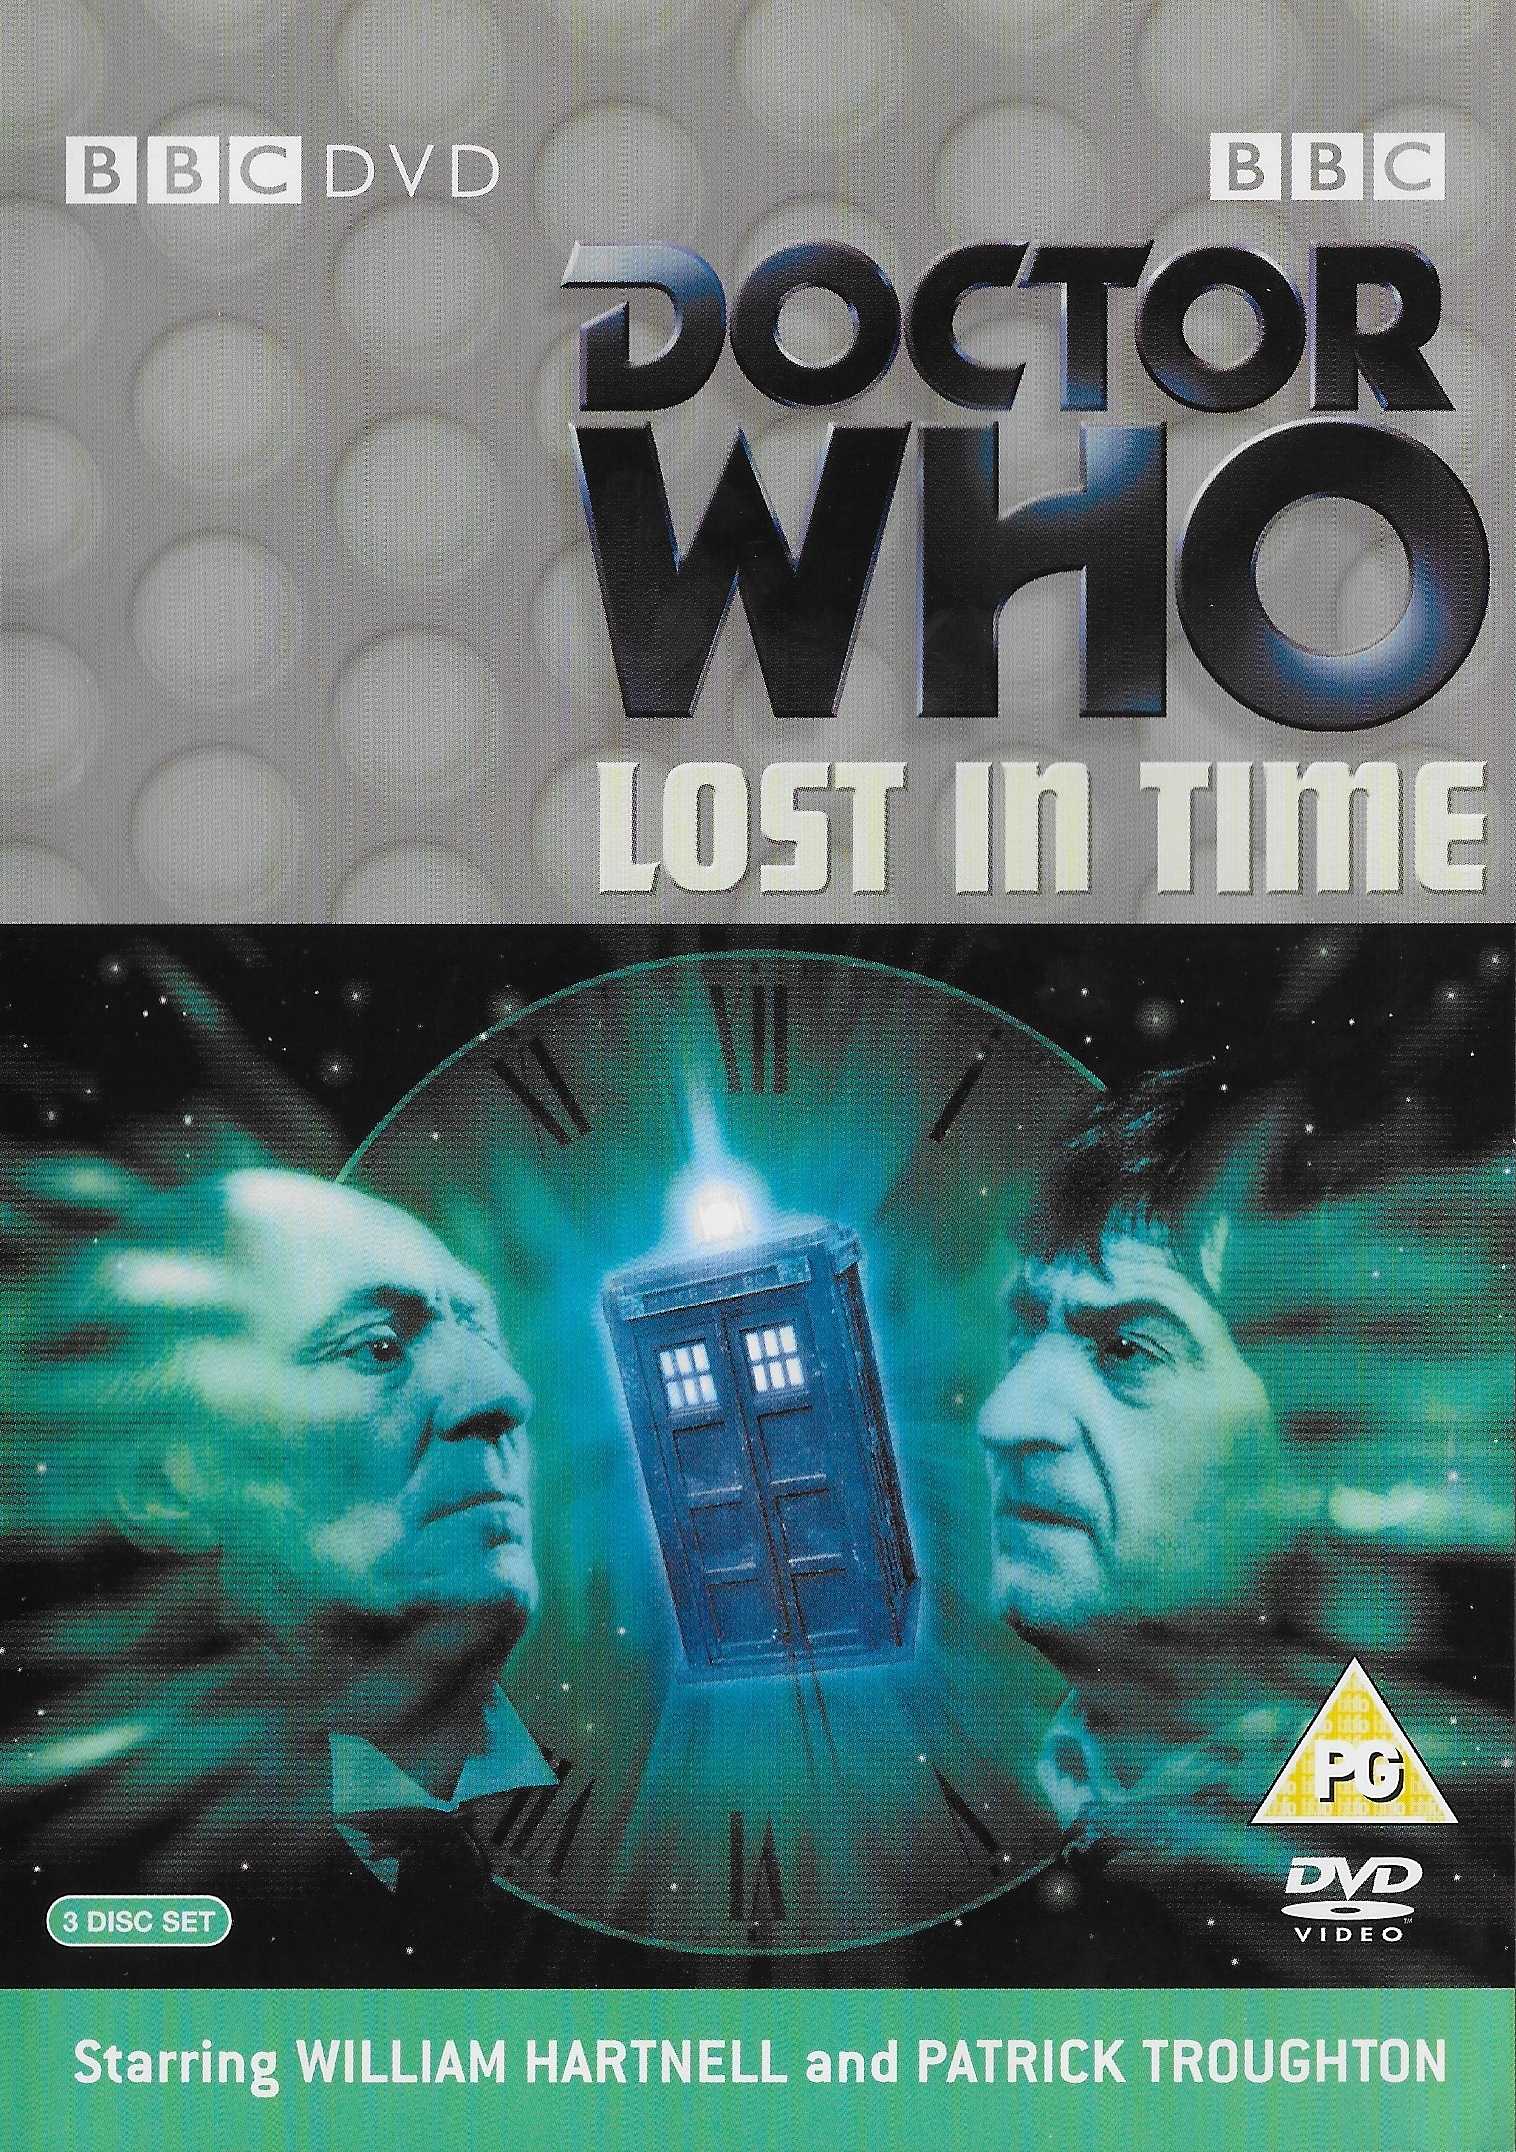 Picture of BBCDVD 1353 Doctor Who - Lost in time by artist Various from the BBC records and Tapes library